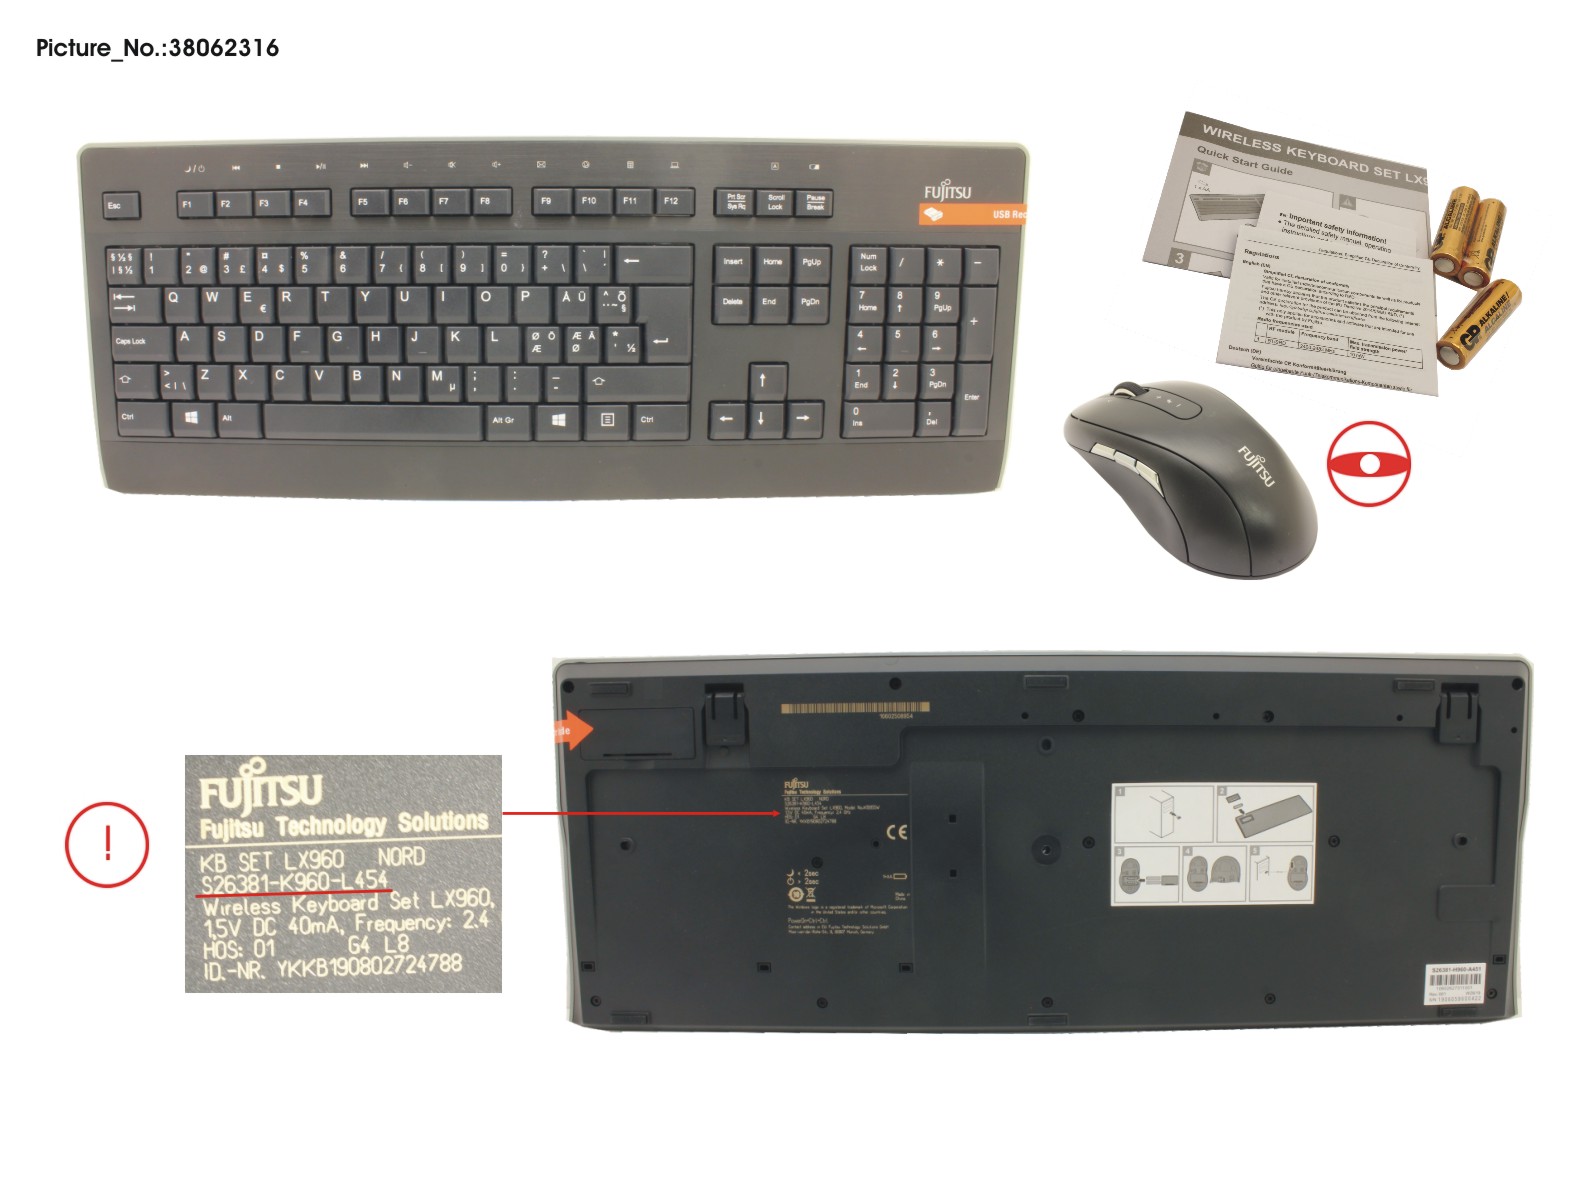 WIRELESS KB MOUSE SET LX960 NORD